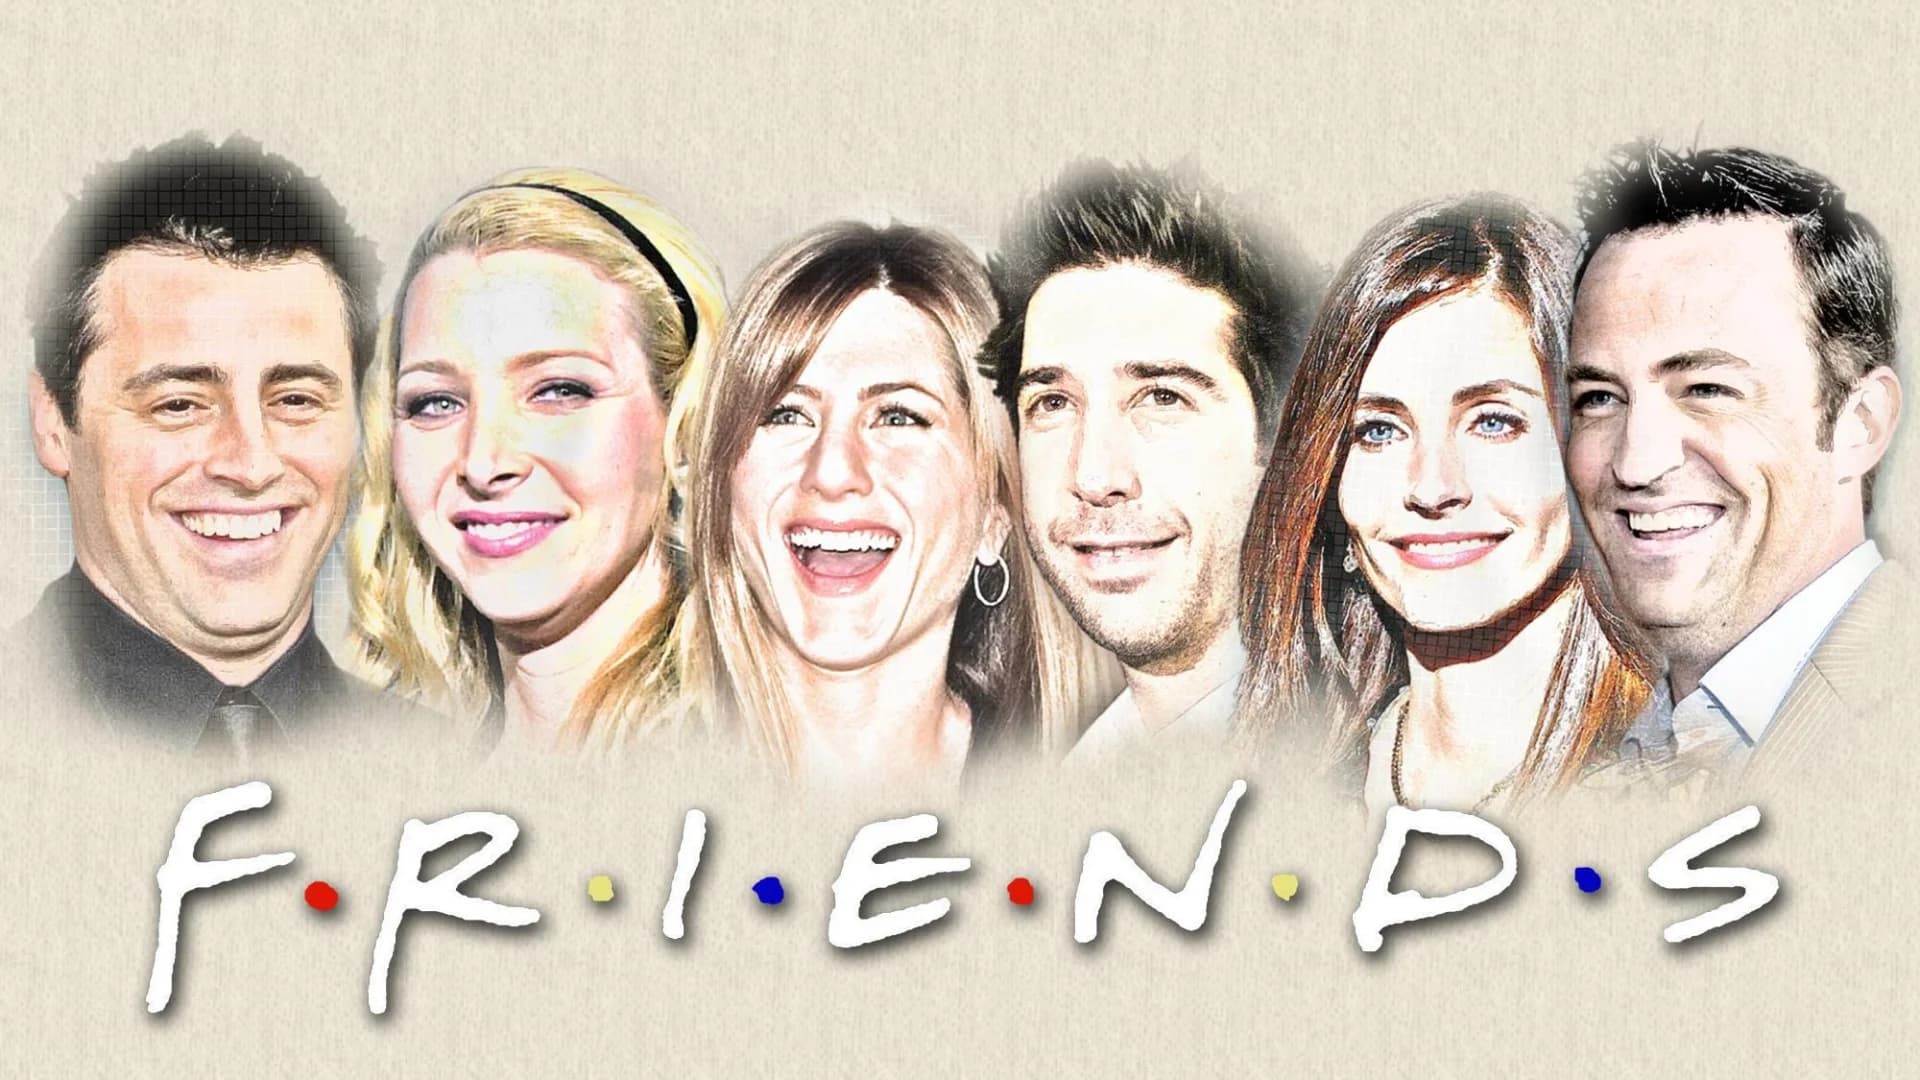 ‘Oh...My...Gawd’ – ‘Friends’ hitting the big screen this fall to celebrate 25th anniversary